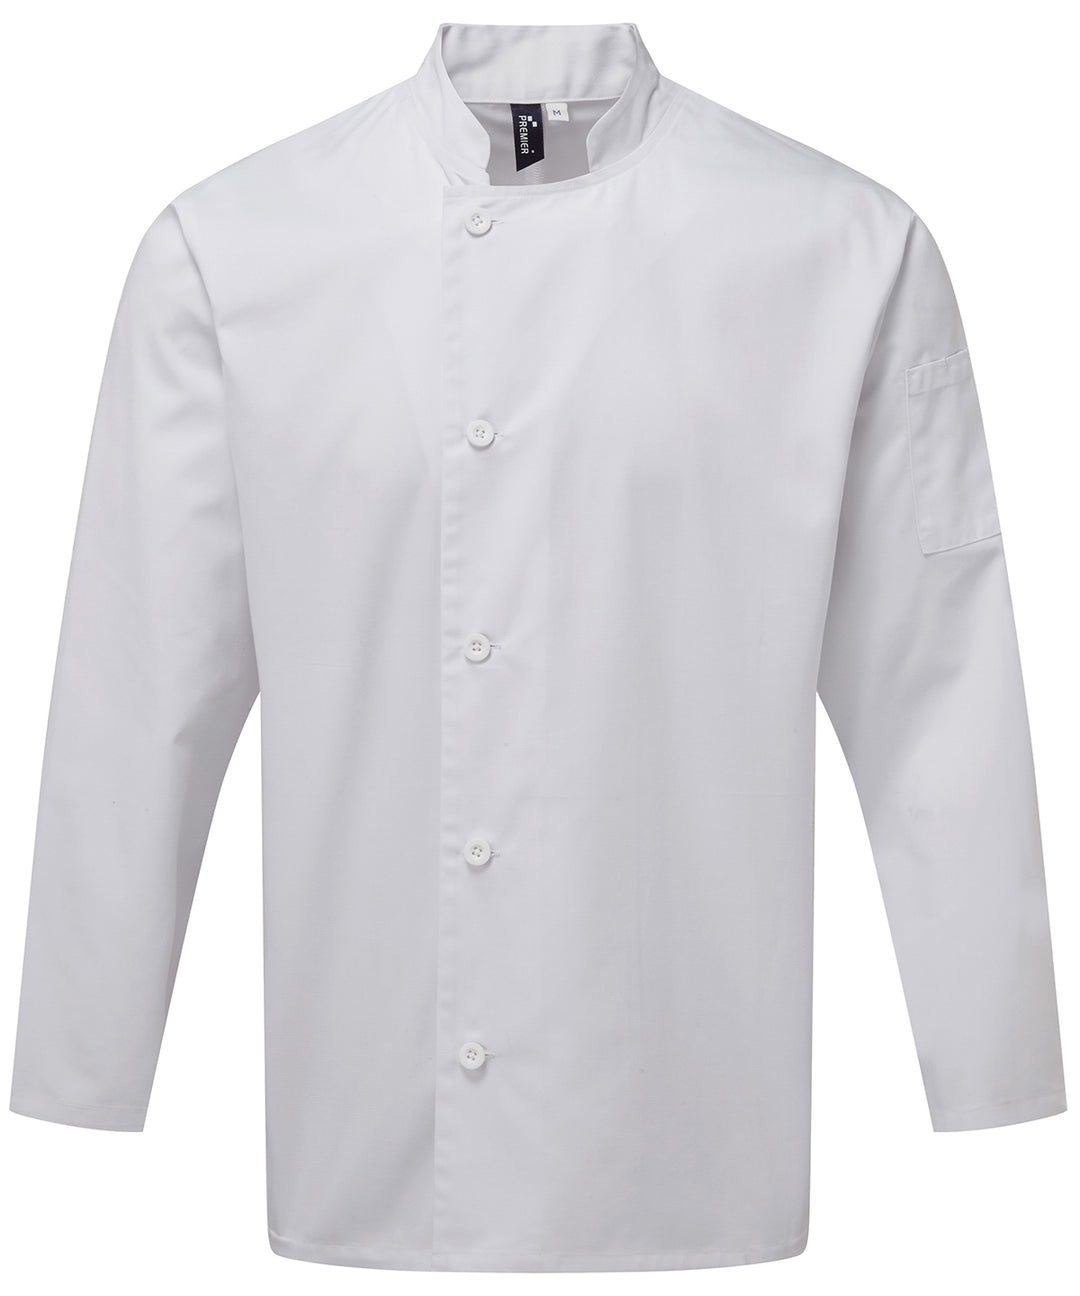 Chef's essential long sleeve jacket White